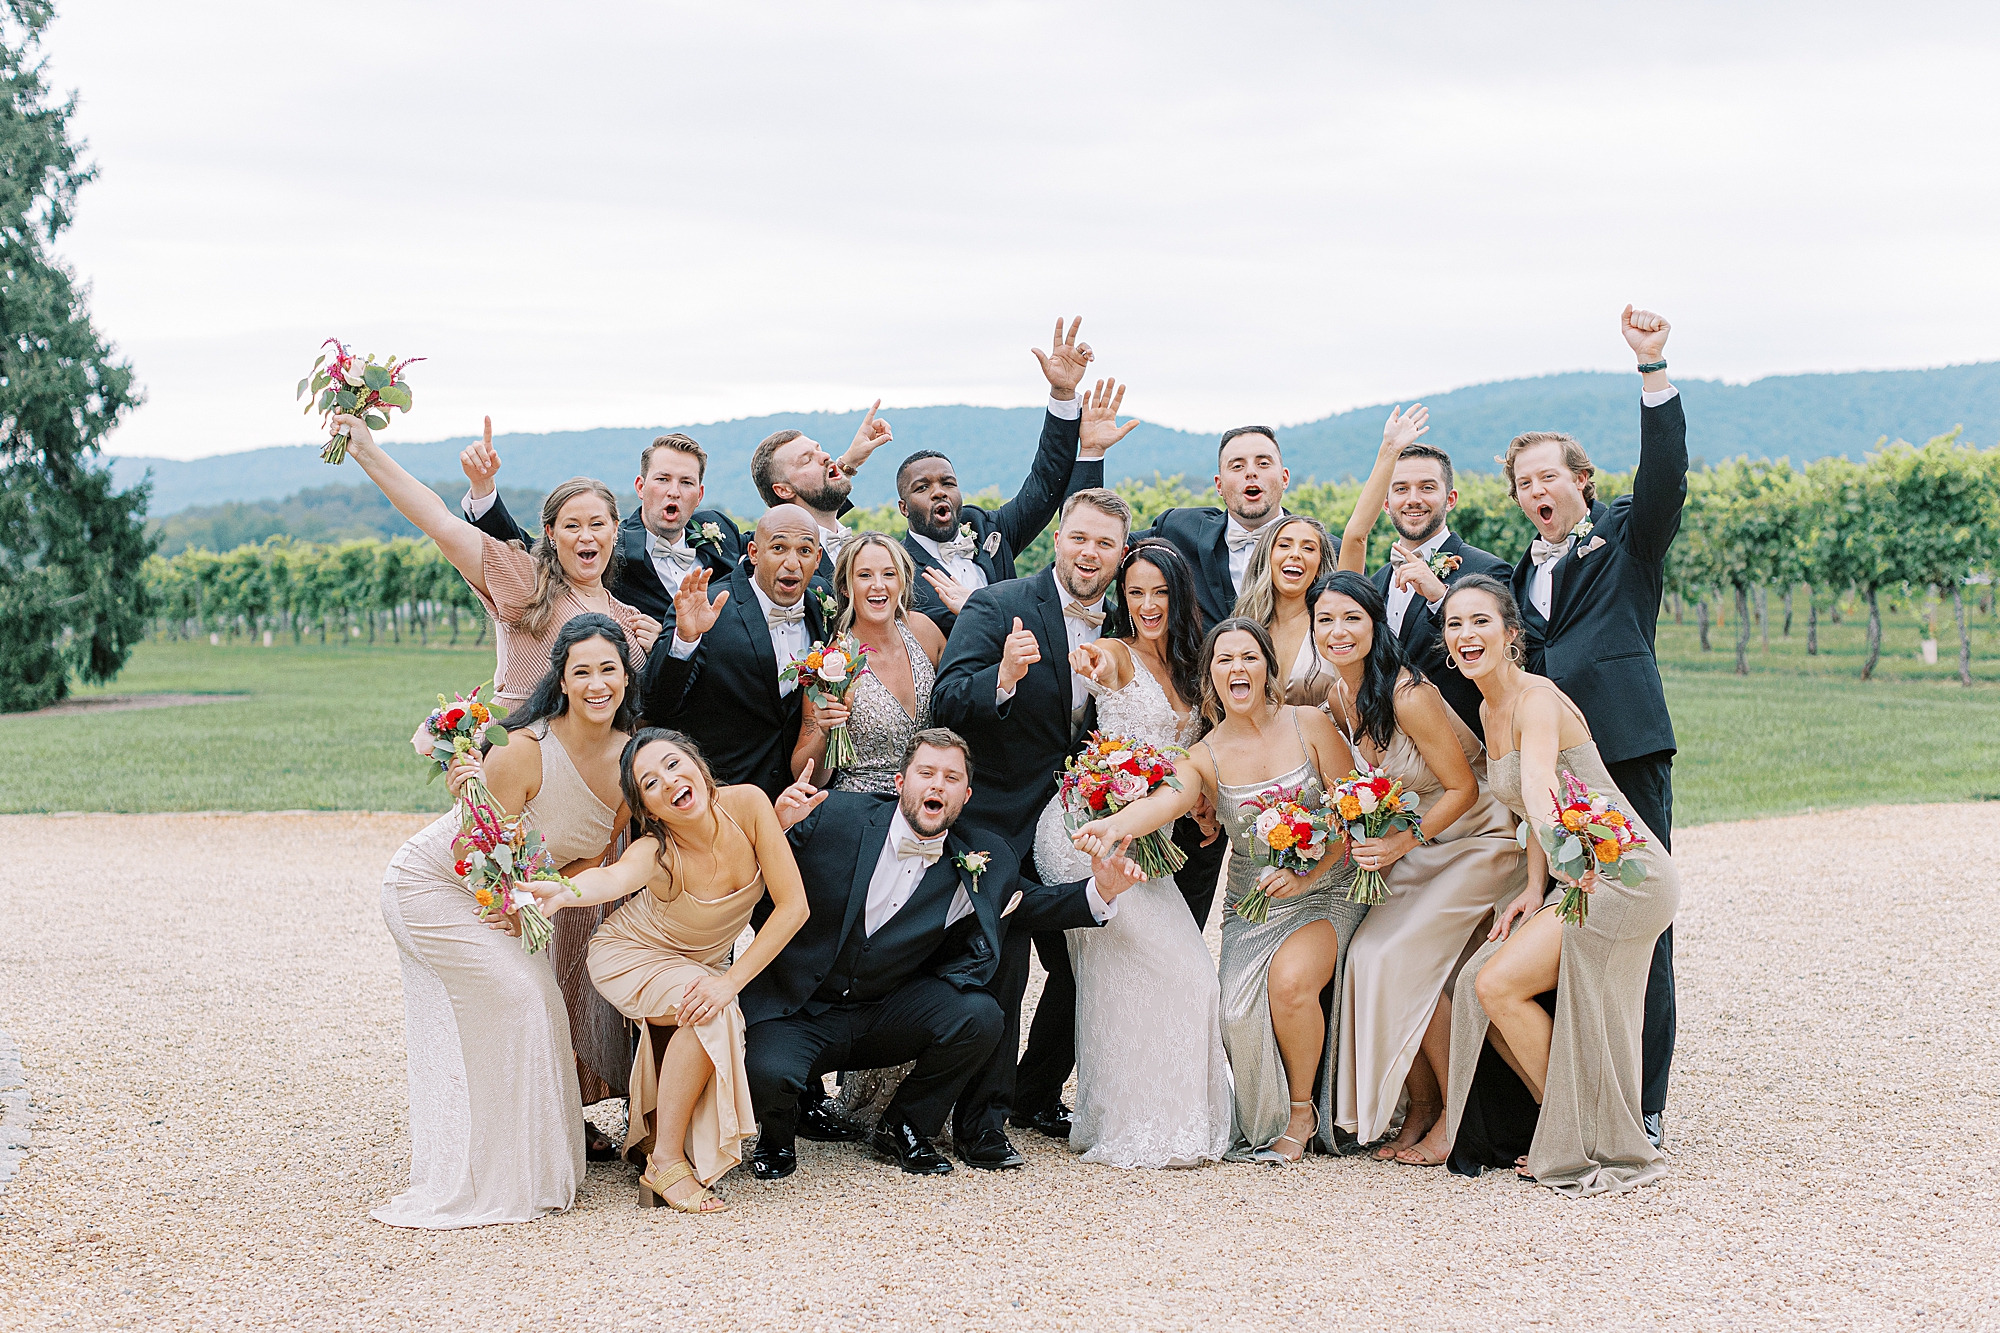 A lively fun group photo with bridesmaids and groomsmen.